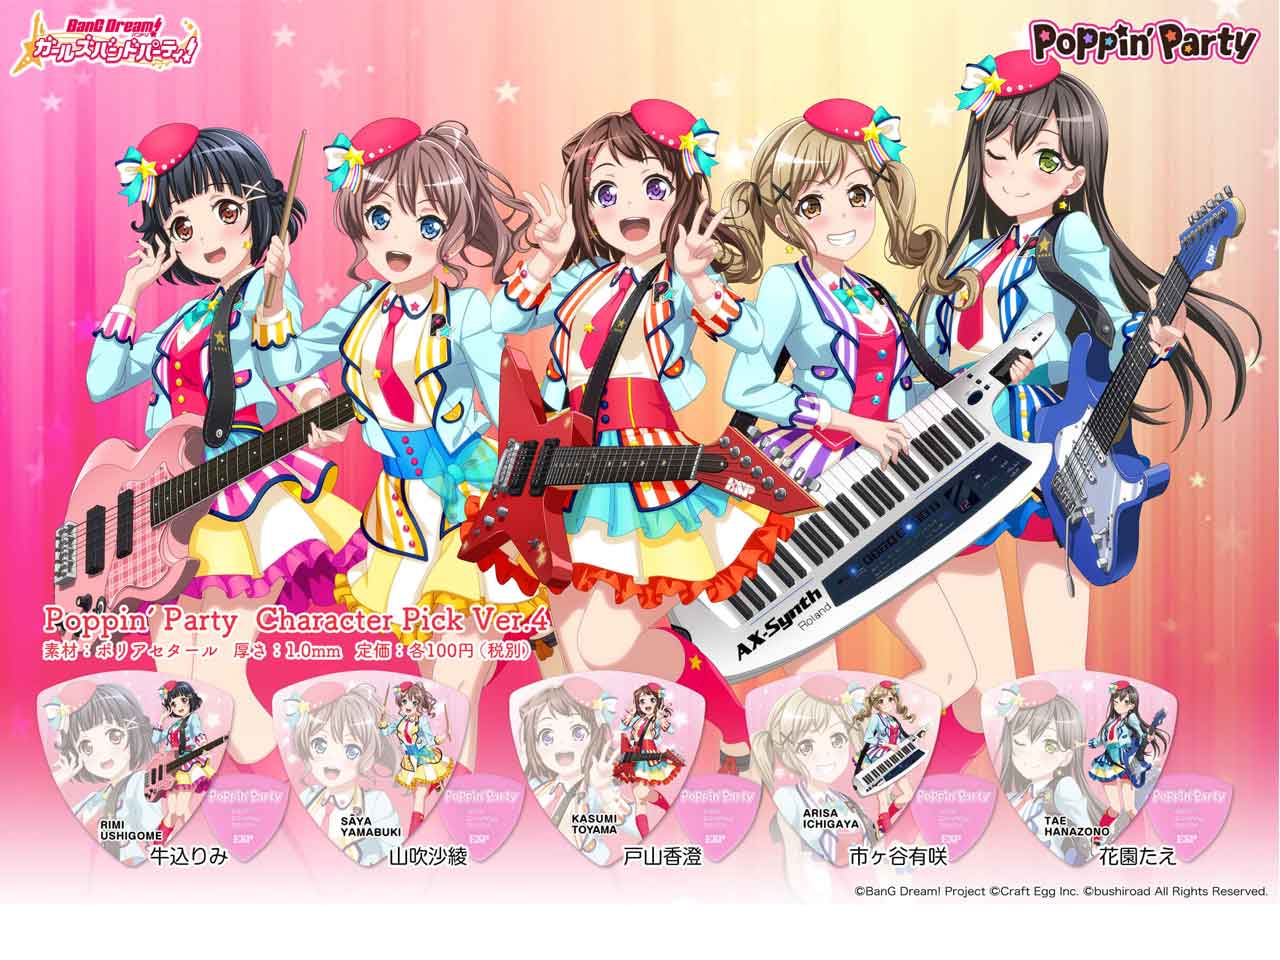 【ESP×BanG Dream!コラボピック】Poppin’Party Character Pick Ver.4 "山吹沙綾"10枚セット（GBP Saya Poppin Party 4）